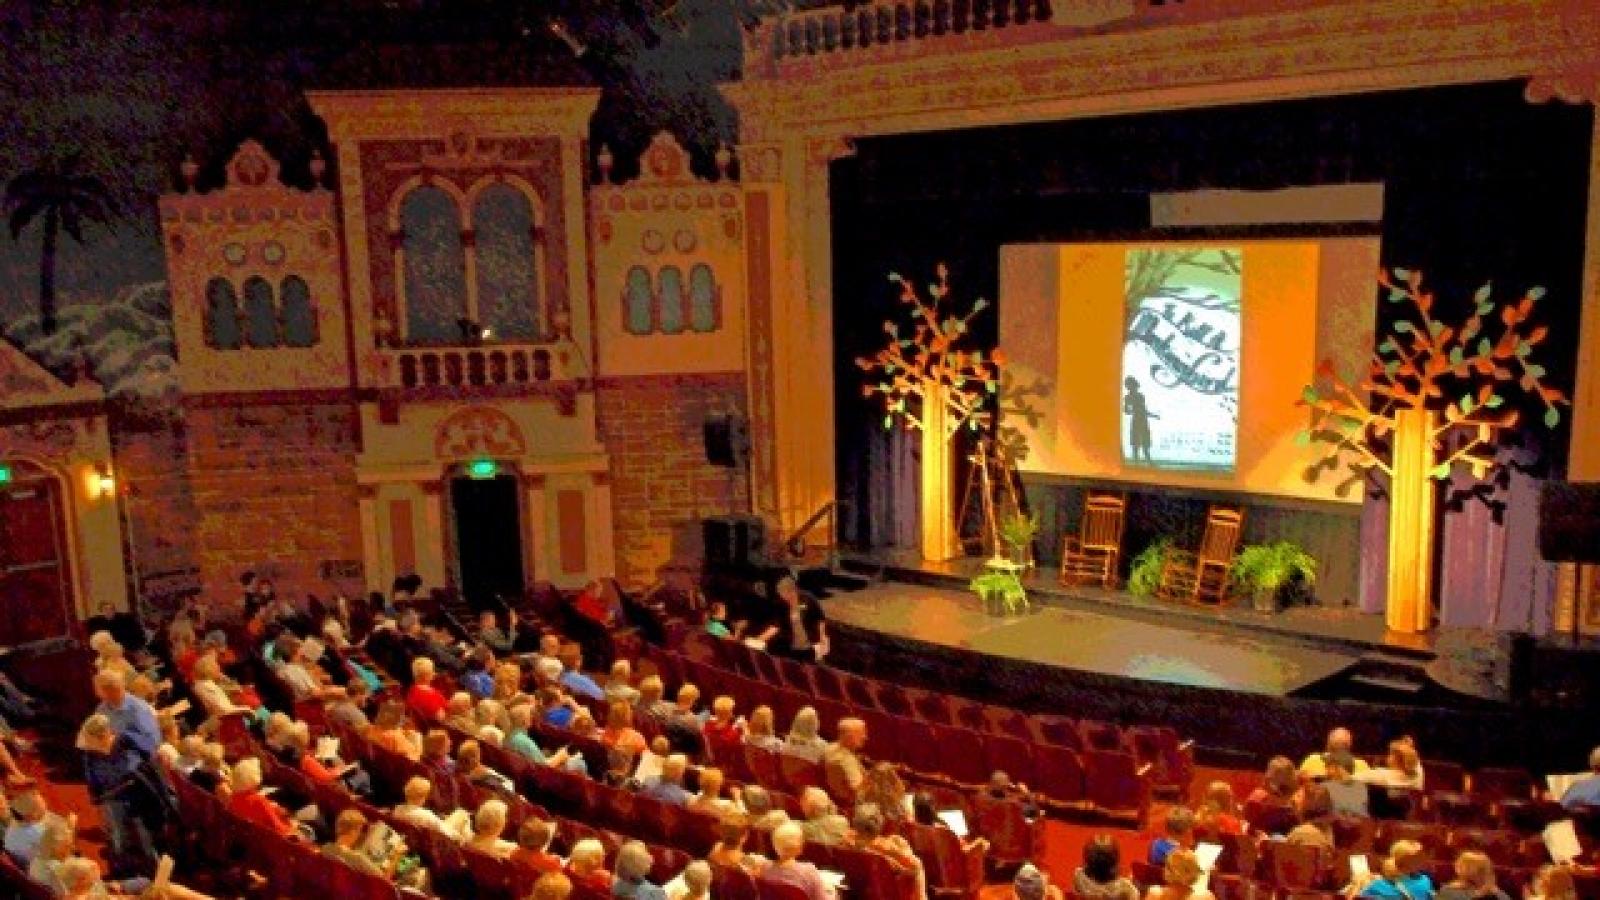 Bird's eye view of the inside of a theater. Stage decorated and room filled with people. 